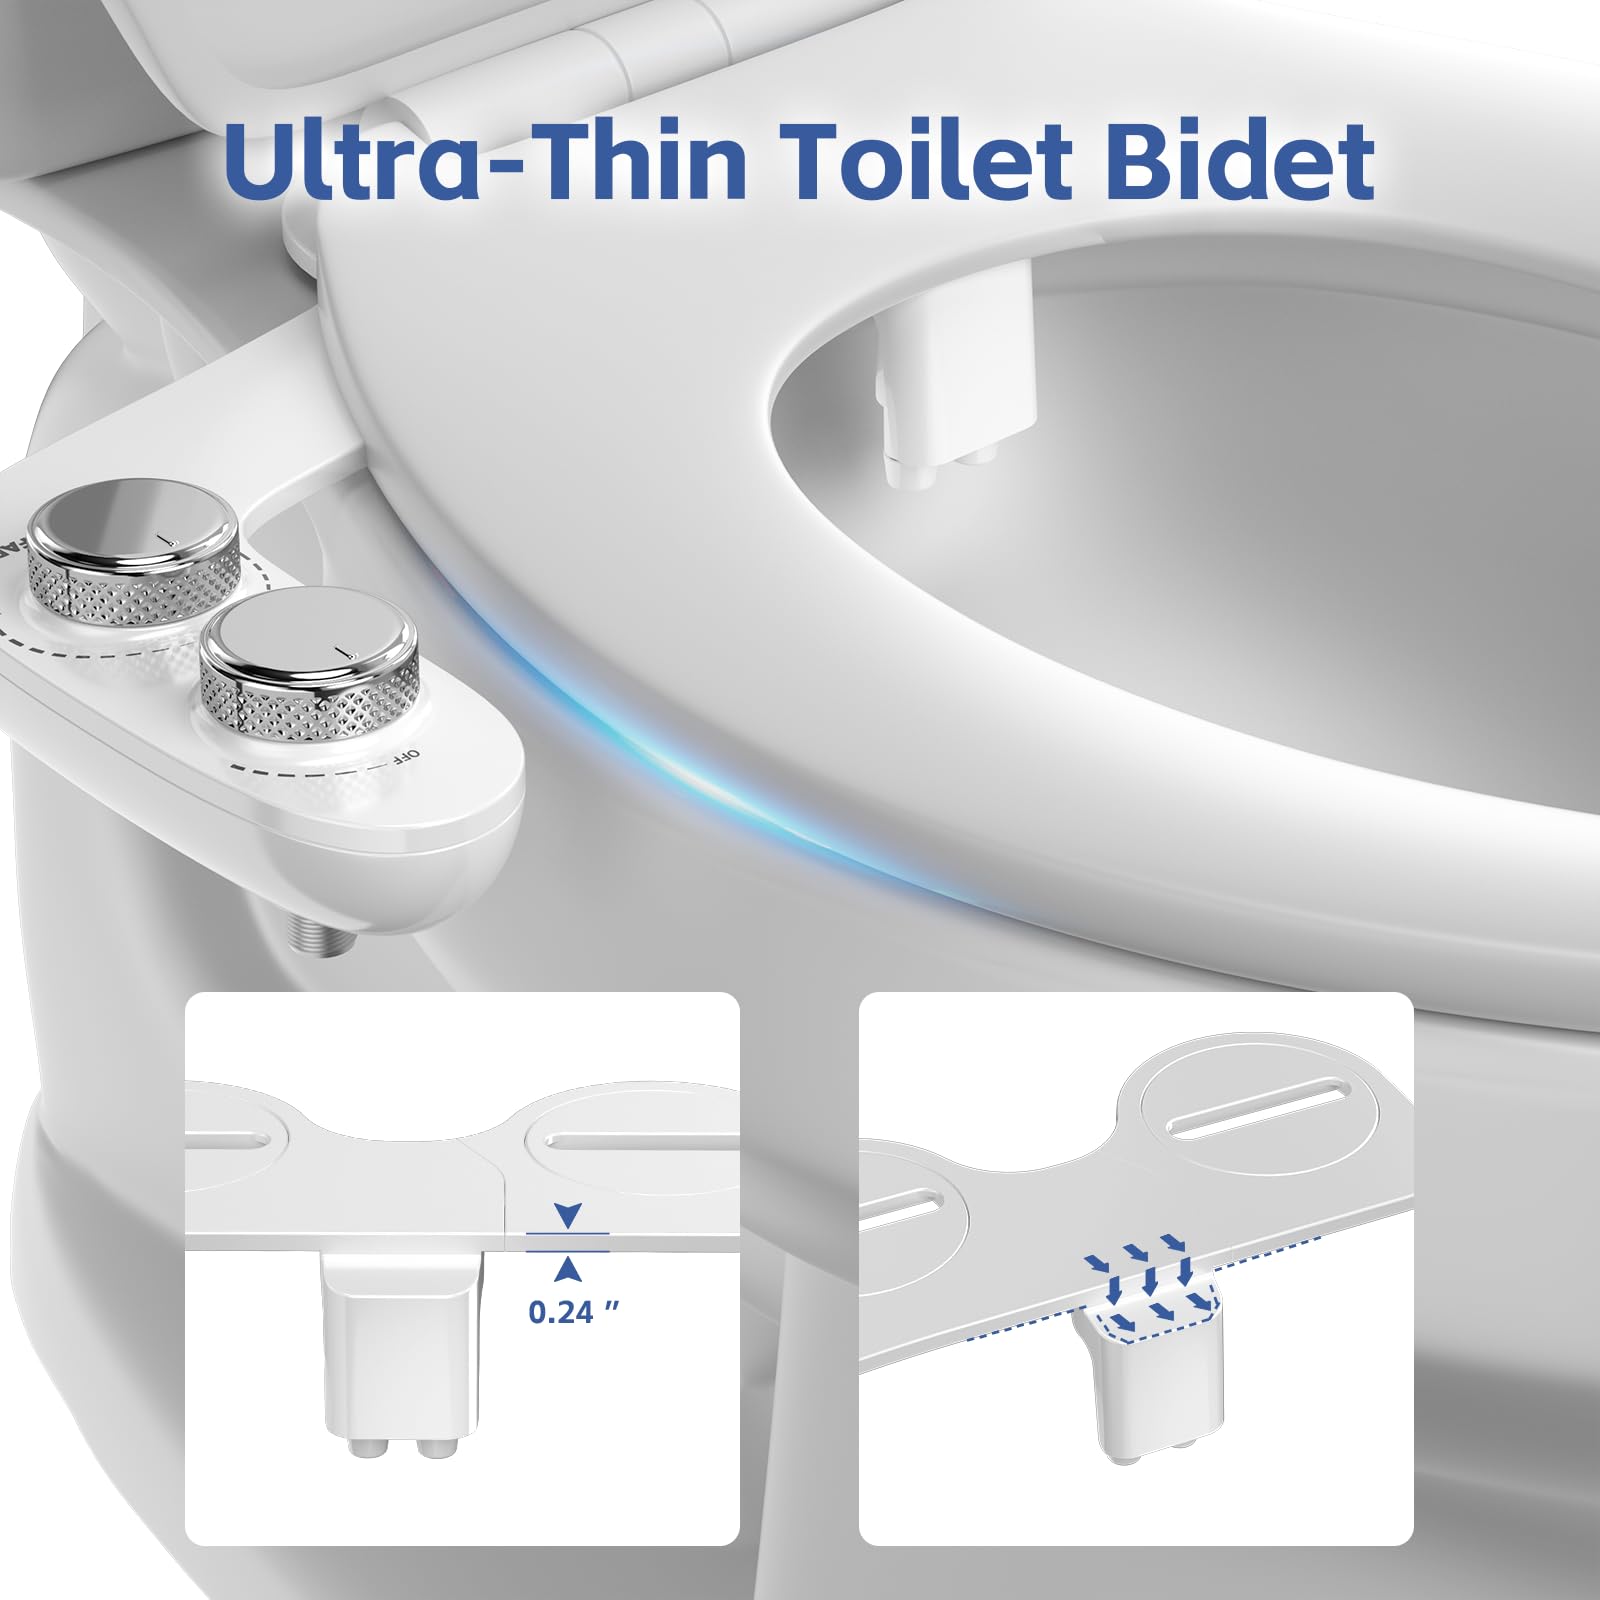 Auterfar Bidet Attachment for Toilet, Dual Nozzle with Self-Cleaning Bidet Toilet Seat, Non-Electric Ultra-Thin Bidets for Existing Toilets, Rear/Feminine Wash with Adjustable Water Pressure